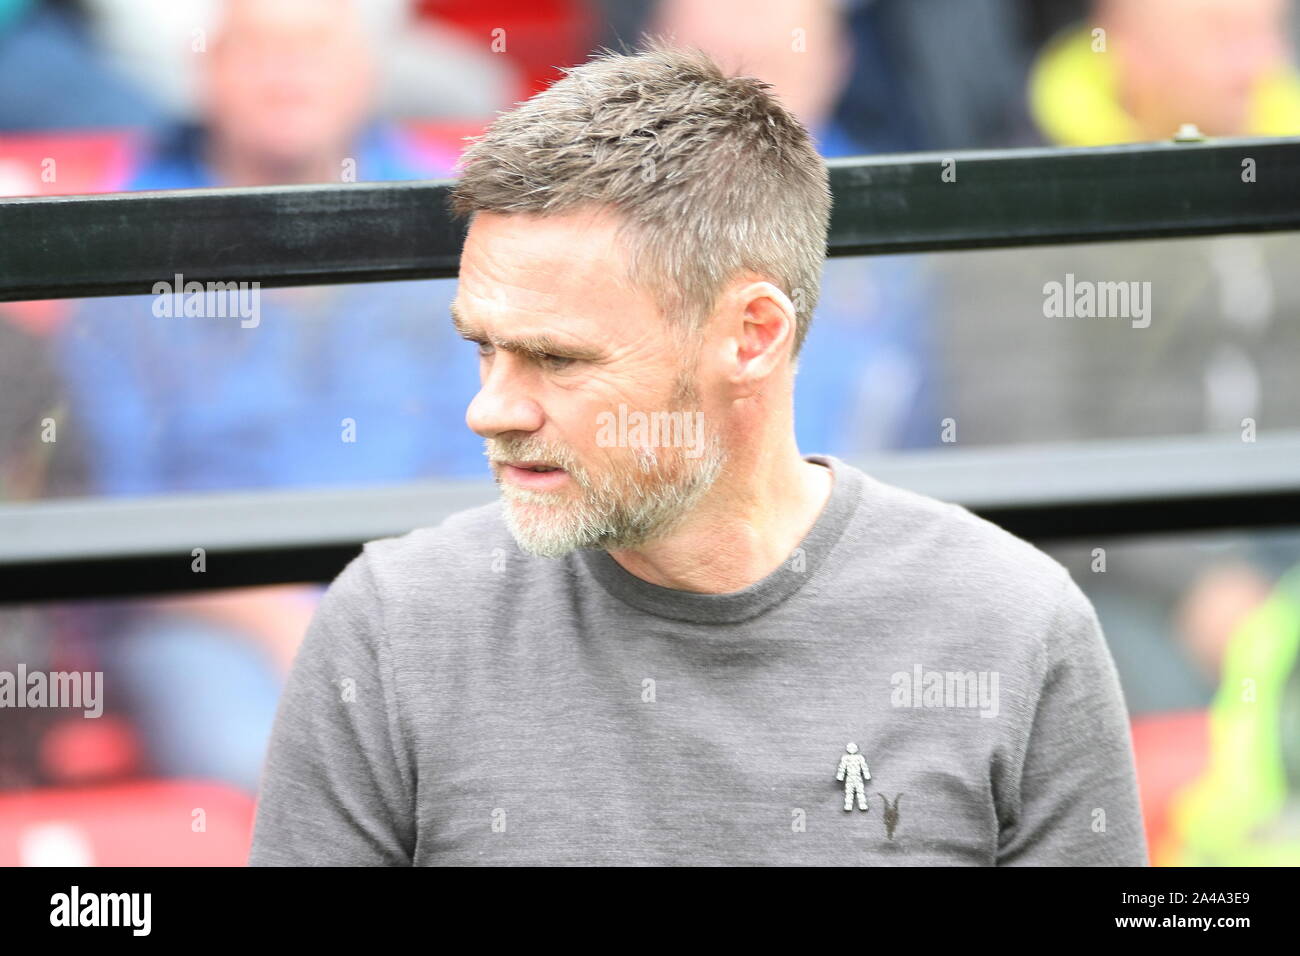 Salford, Greater Manchester, UK. 12th October, 2019. Salford City manager Graham Alexander in the dugout at The Peninsula Stadium ahead of the League Two clash with Cambridge United. Stock Photo